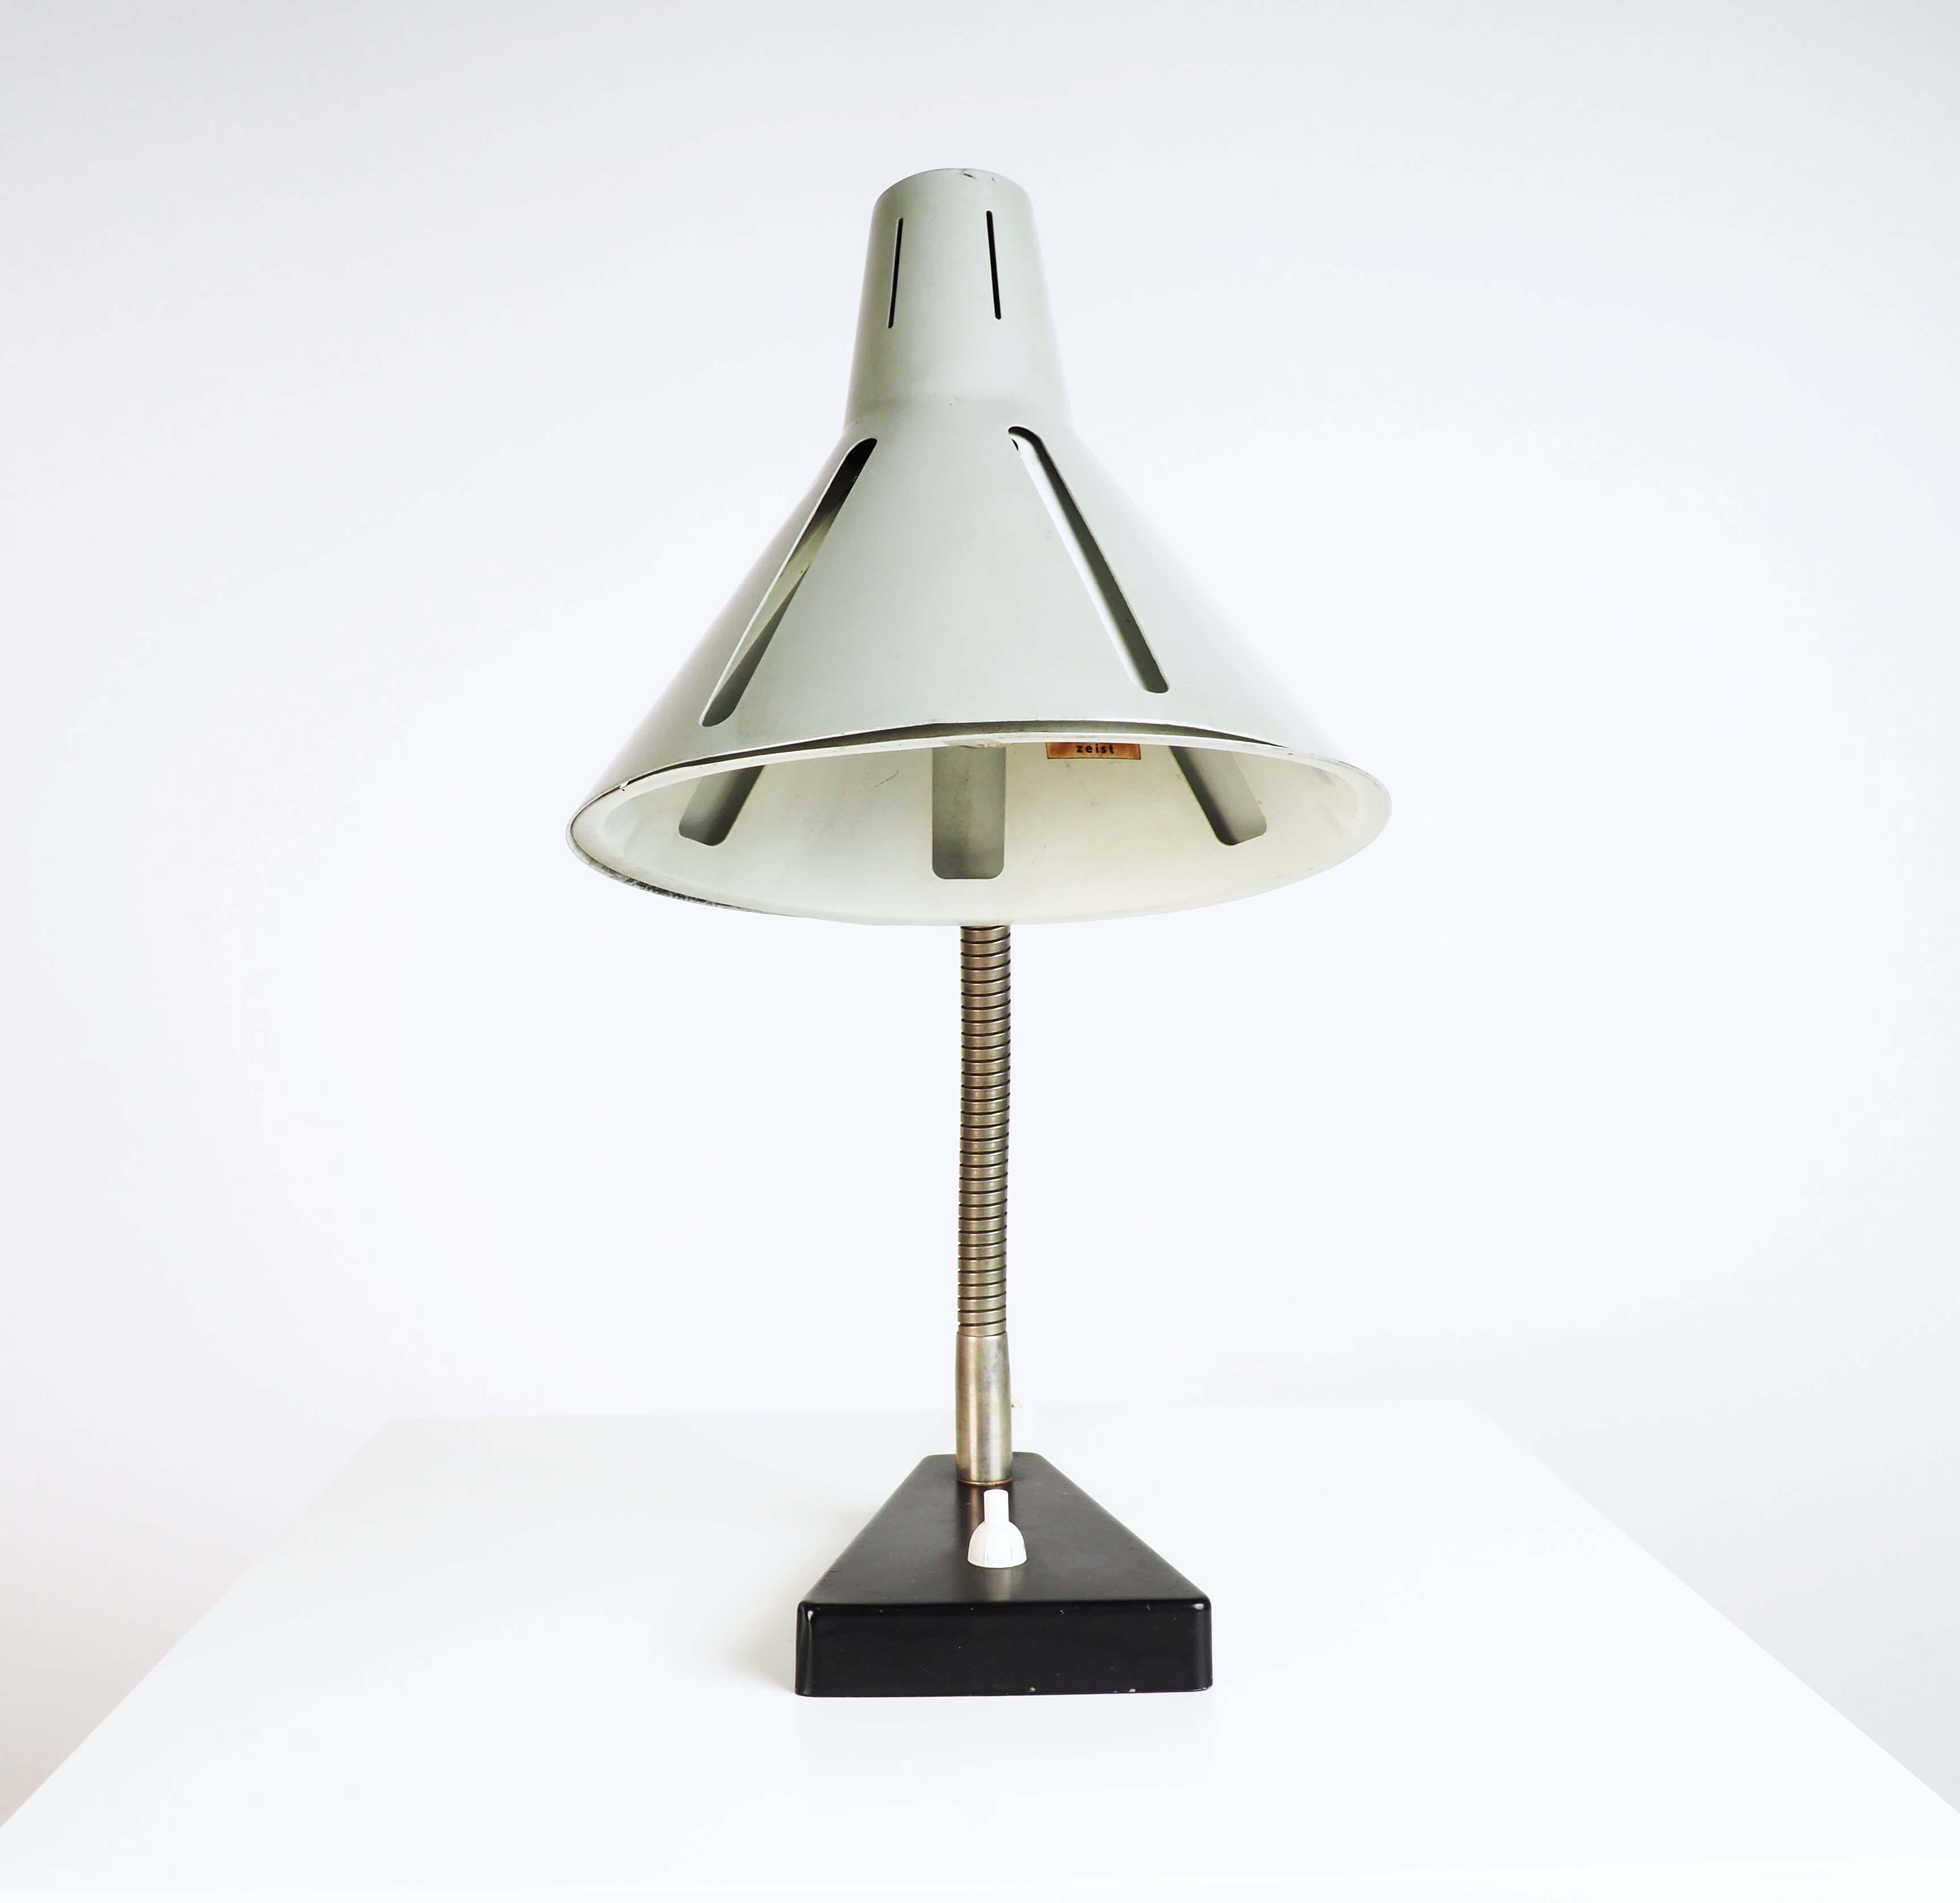 Table lamp by H. Busquet from Hala Zeist, Netherlands. Made in the 1950s. A part of a series of lamps called 